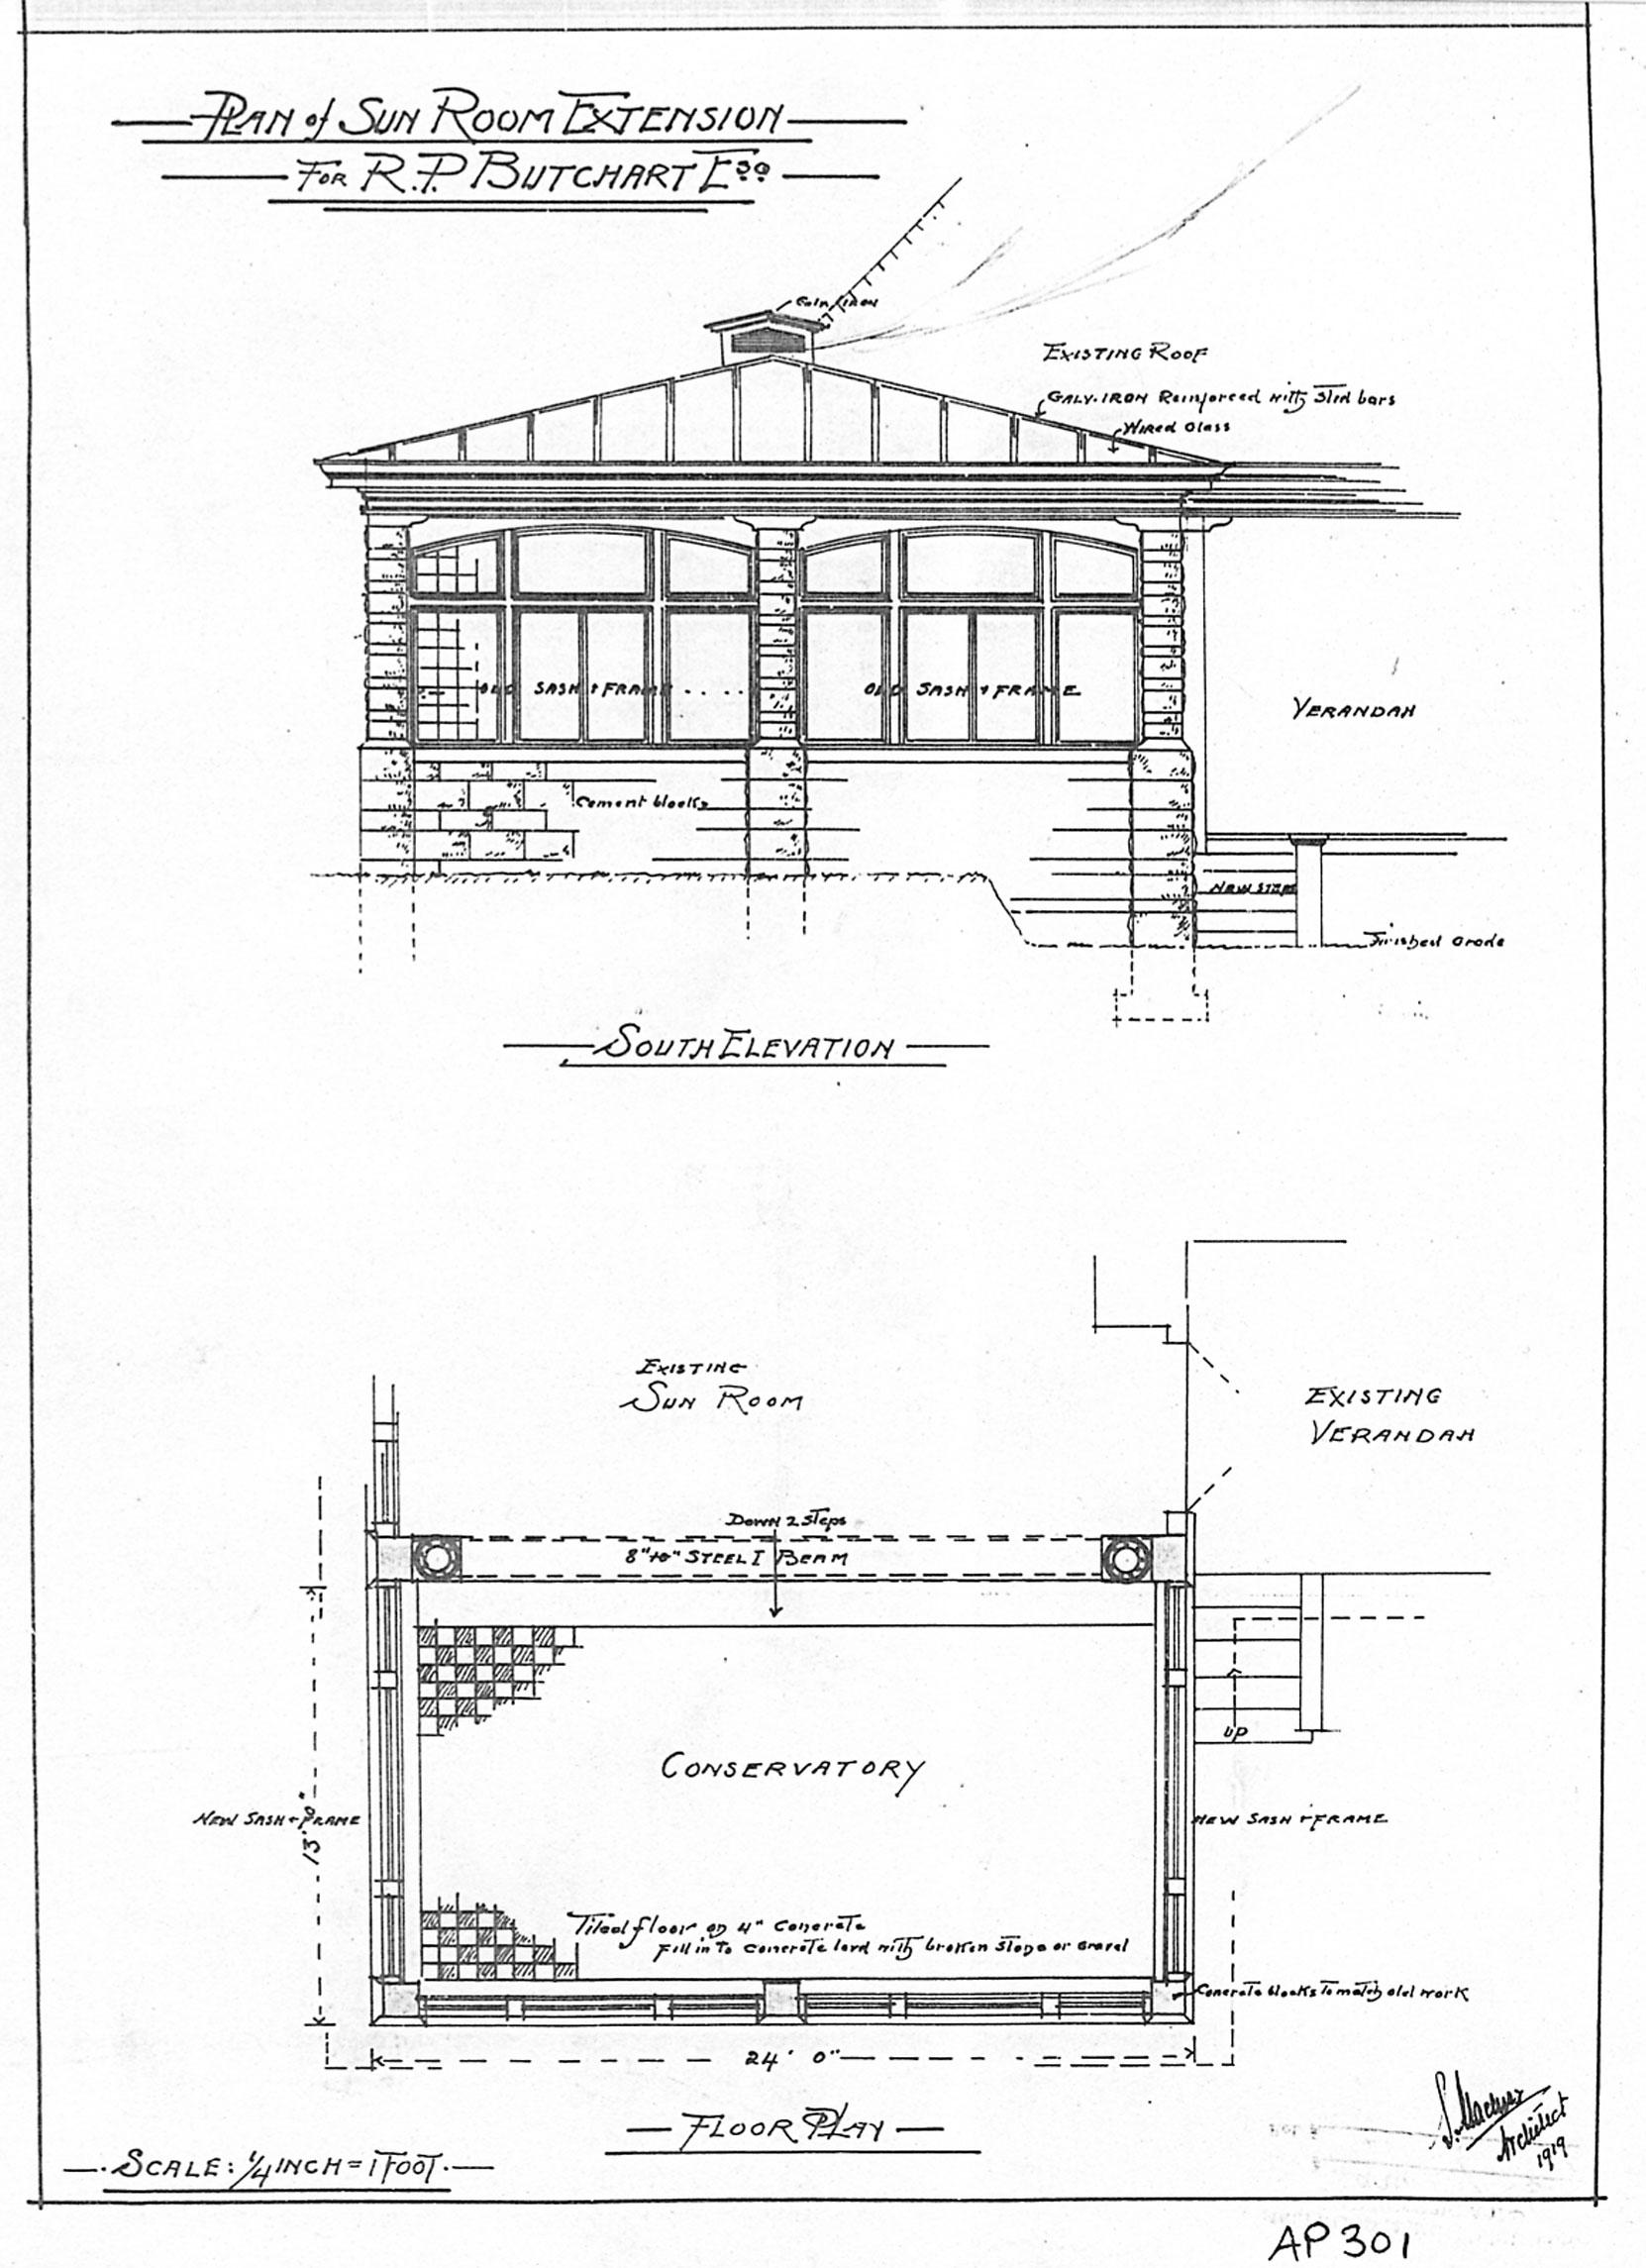 Detail from Samuel Maclure drawing for "Sun Room Extension" at Benvenuto, 1919. The original Sun Room addition had been designed by Samuel Macure in 1911. (courtesy of UVic Library - Special Collections)